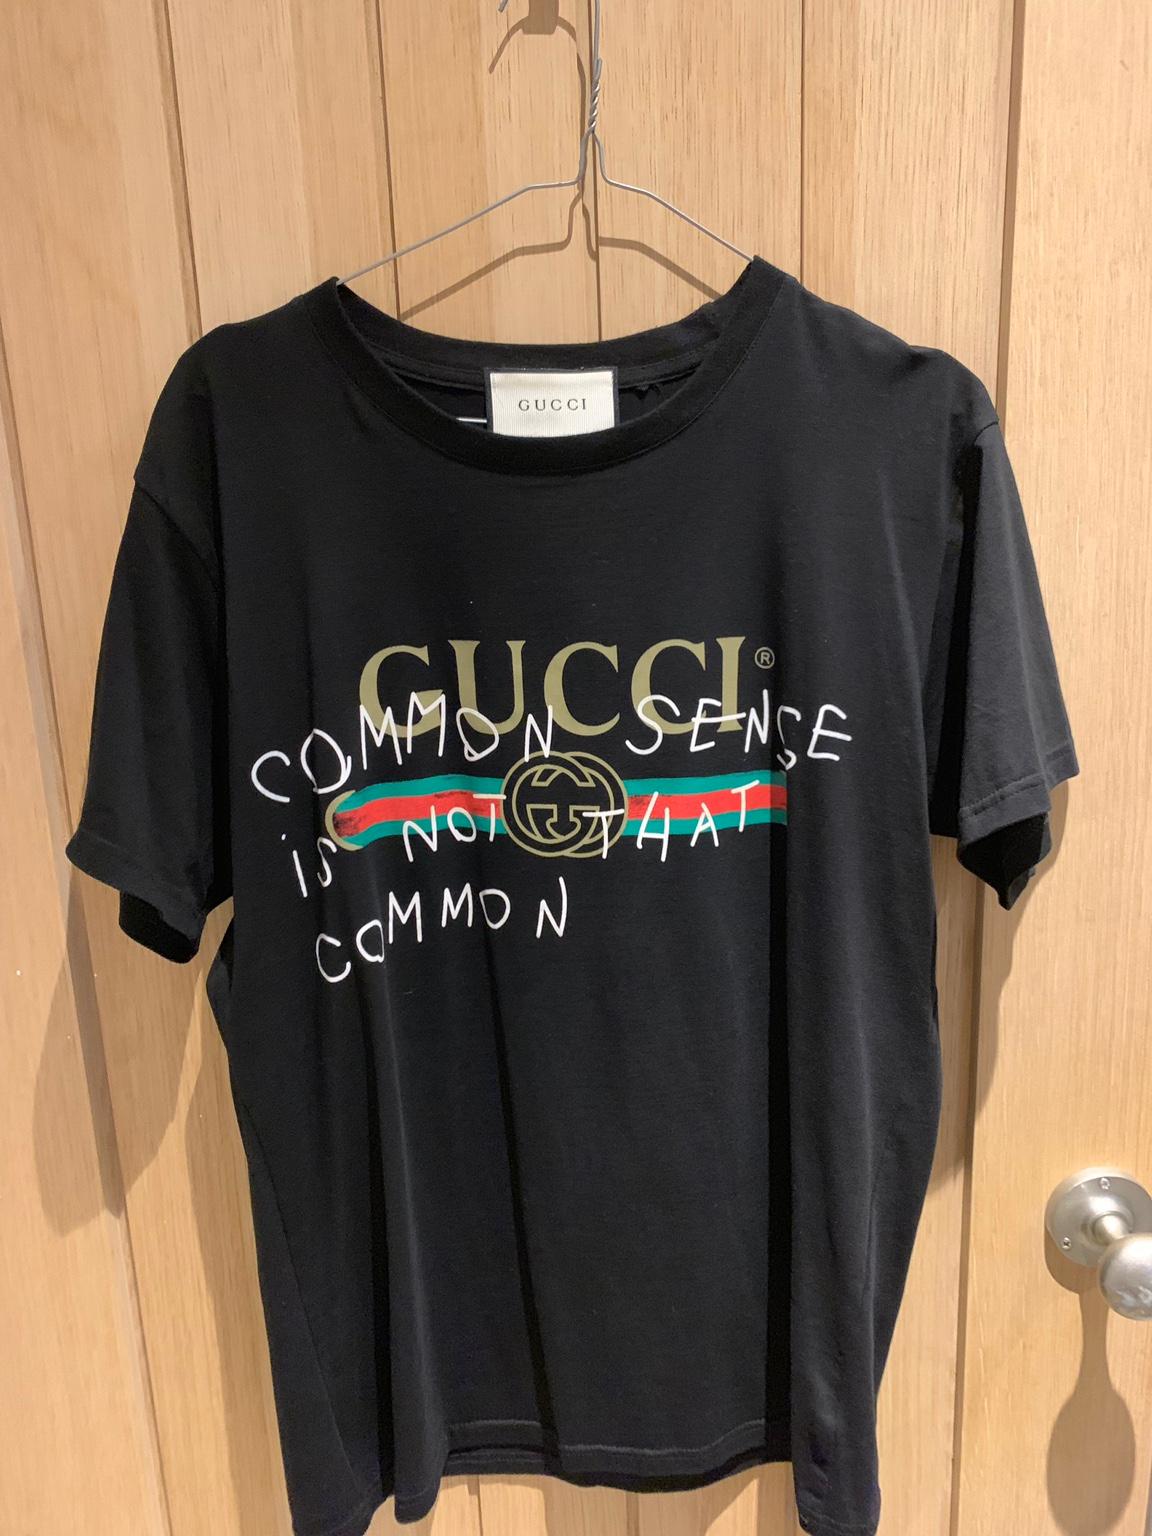 Gucci scribble t shirt in South 